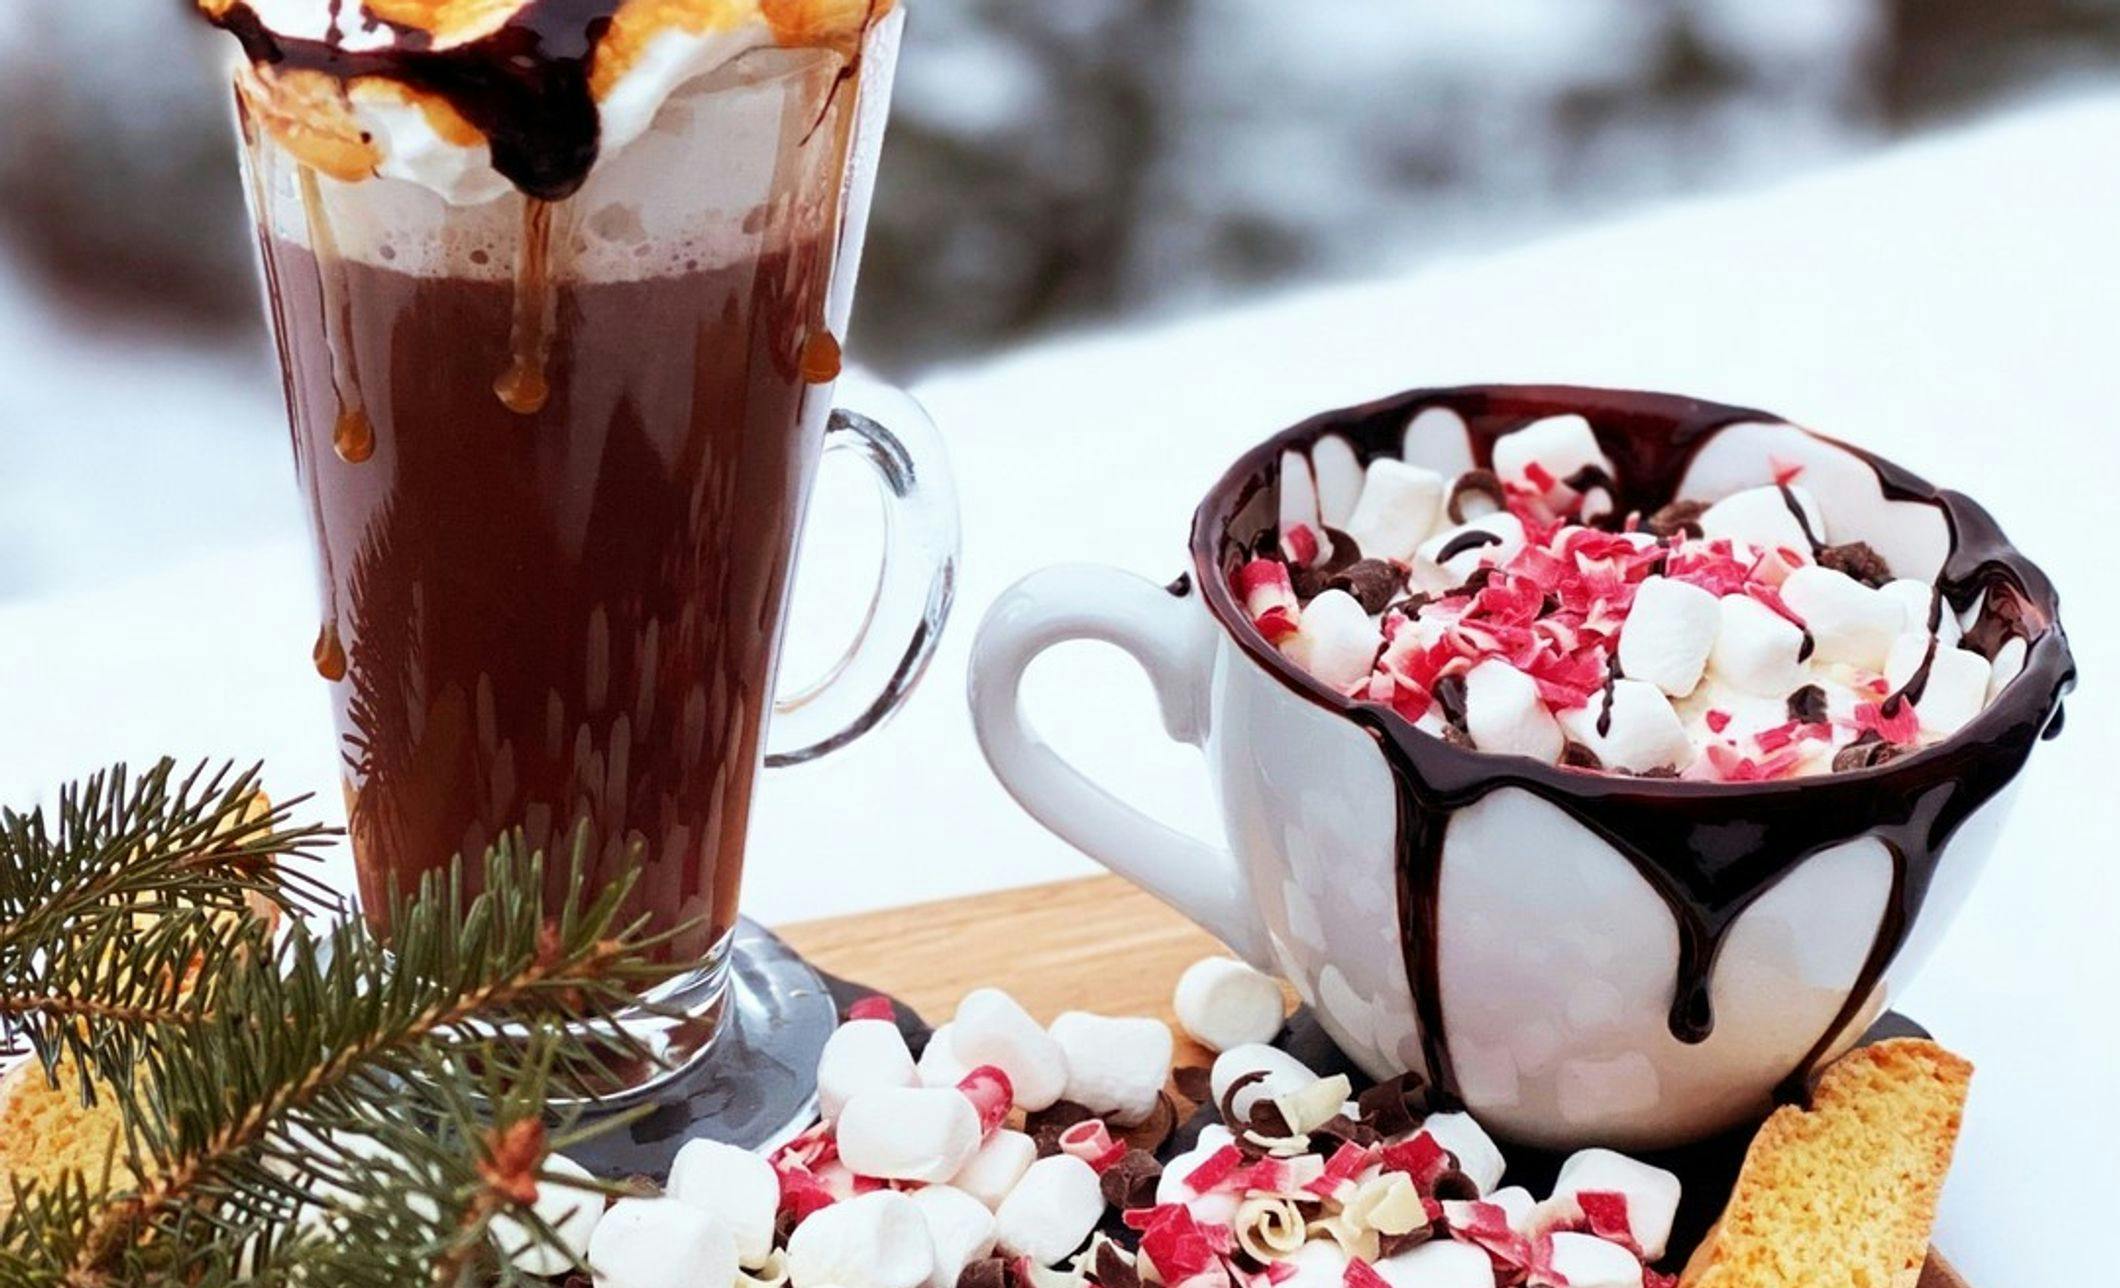 Two hot chocolates set outside in the winter with festive decorations and toppings